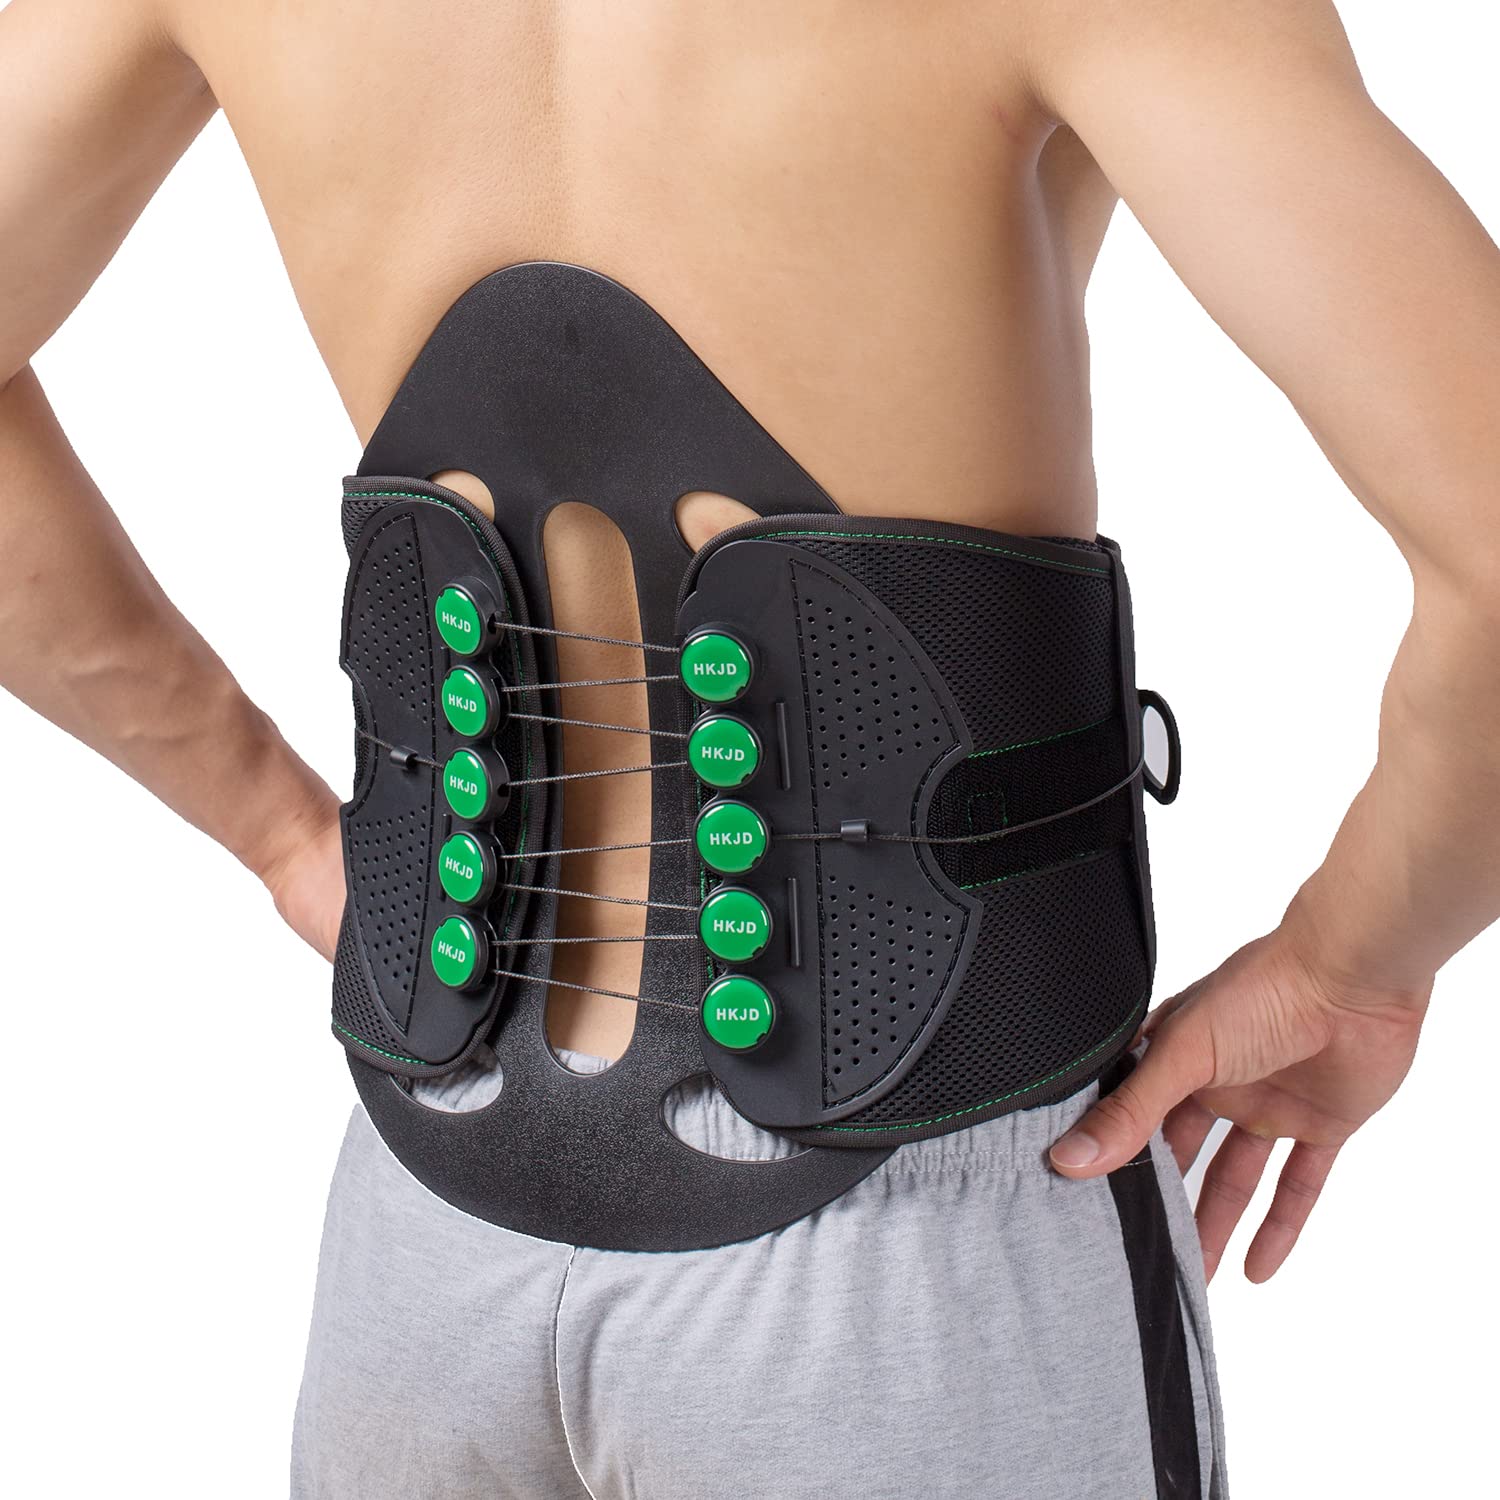 Tall Lso Back Brace with Metal Support Plate for Posture